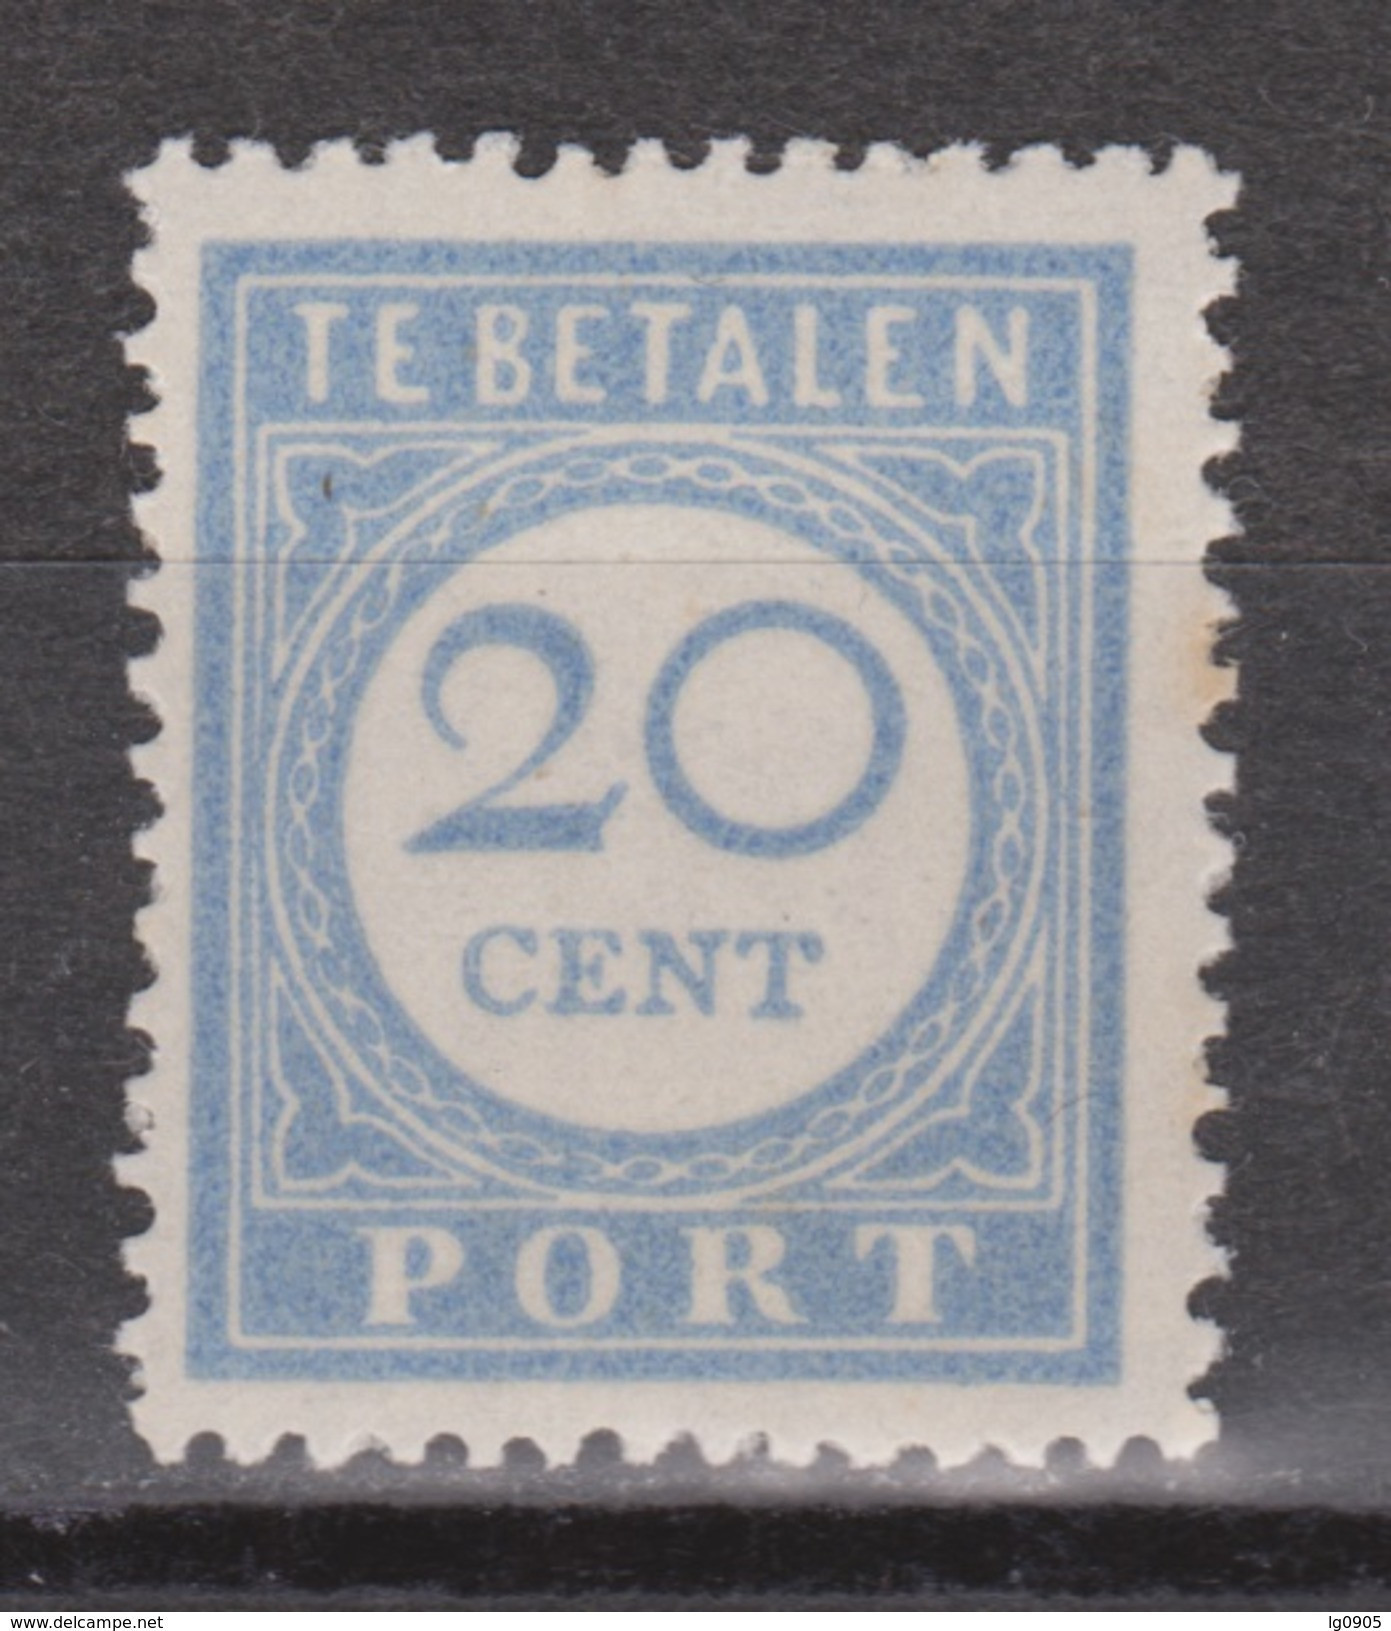 NVPH Nederland Netherlands Holanda Pays Bas Port 58 MLH Timbre-taxe Postmarke Sellos De Correos NOW MANY DUE STAMPS - Postage Due